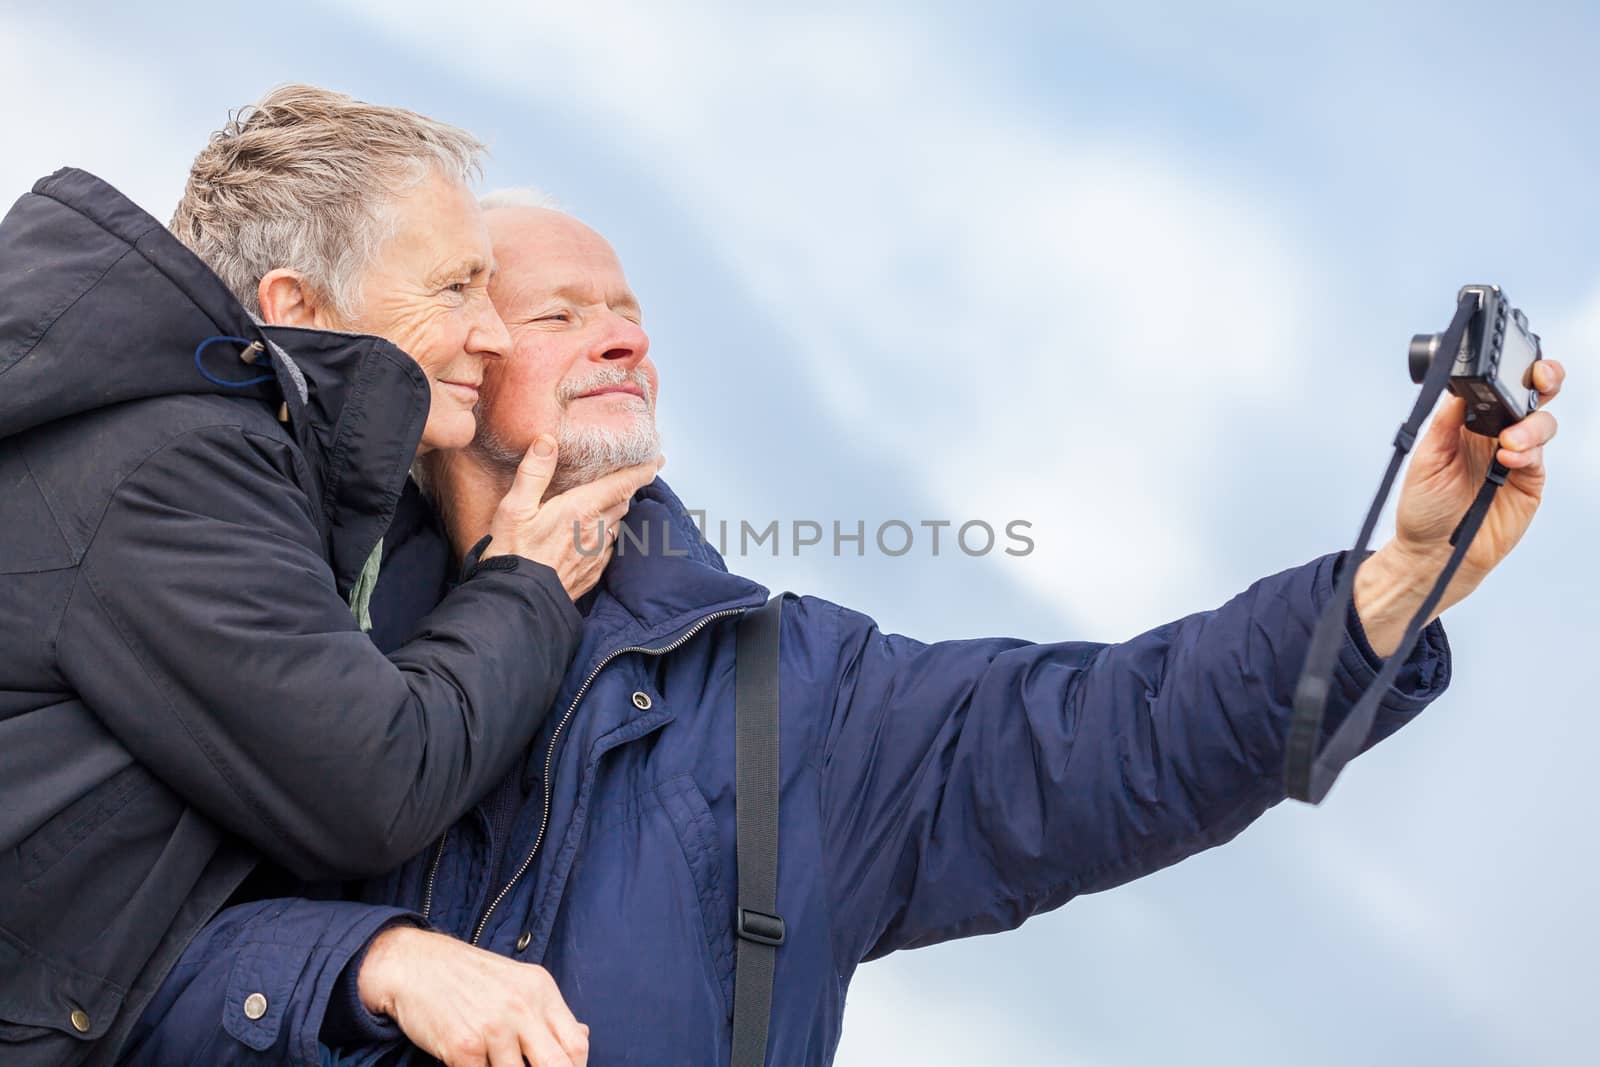 Elderly couple taking a self portrait on a compact digital camera posing in the open air and sunshine with their heads close together smiling at the lens